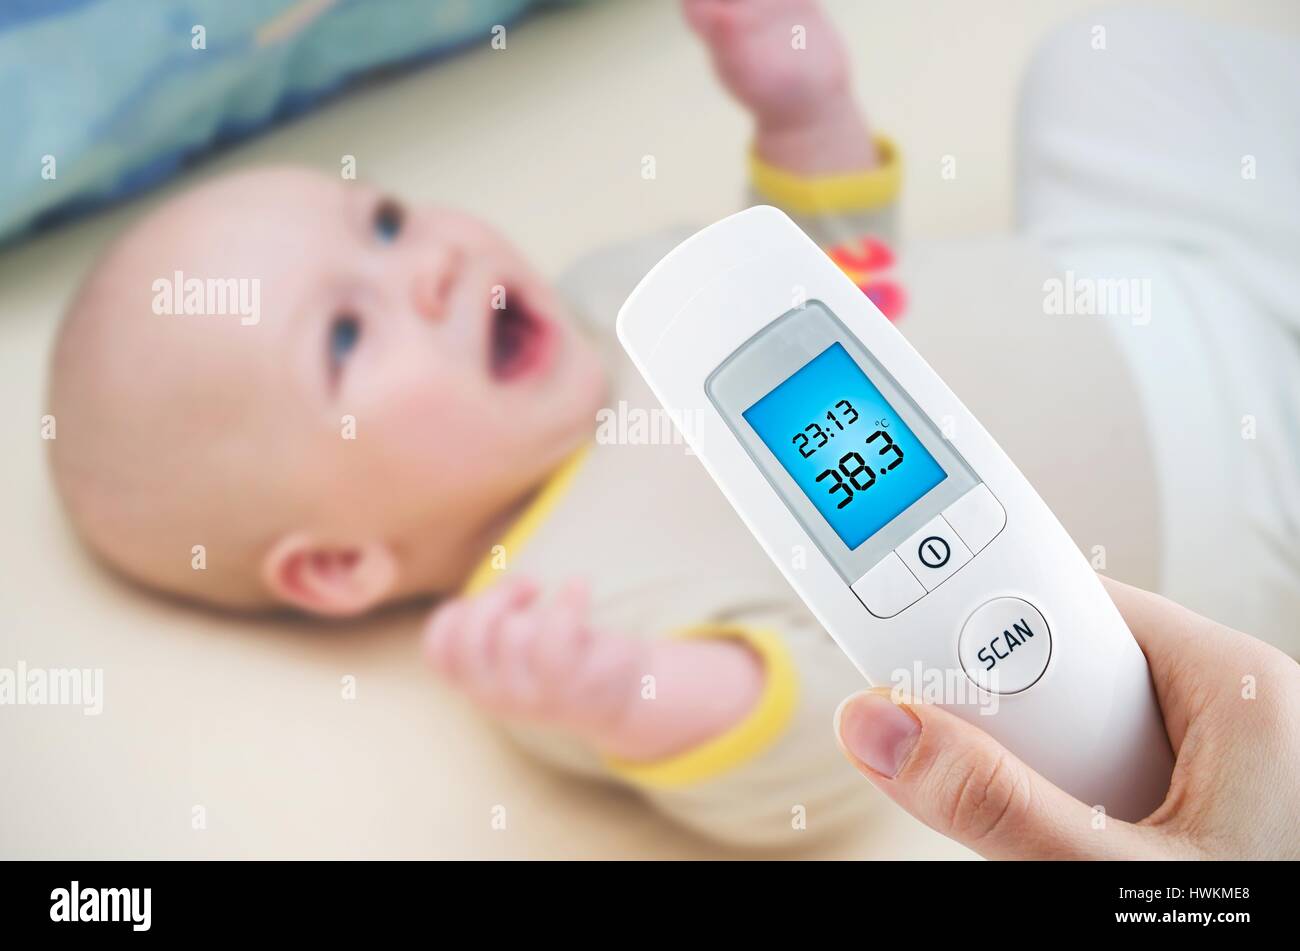 Baby Room Temperature Monitor Stock Photo - Download Image Now